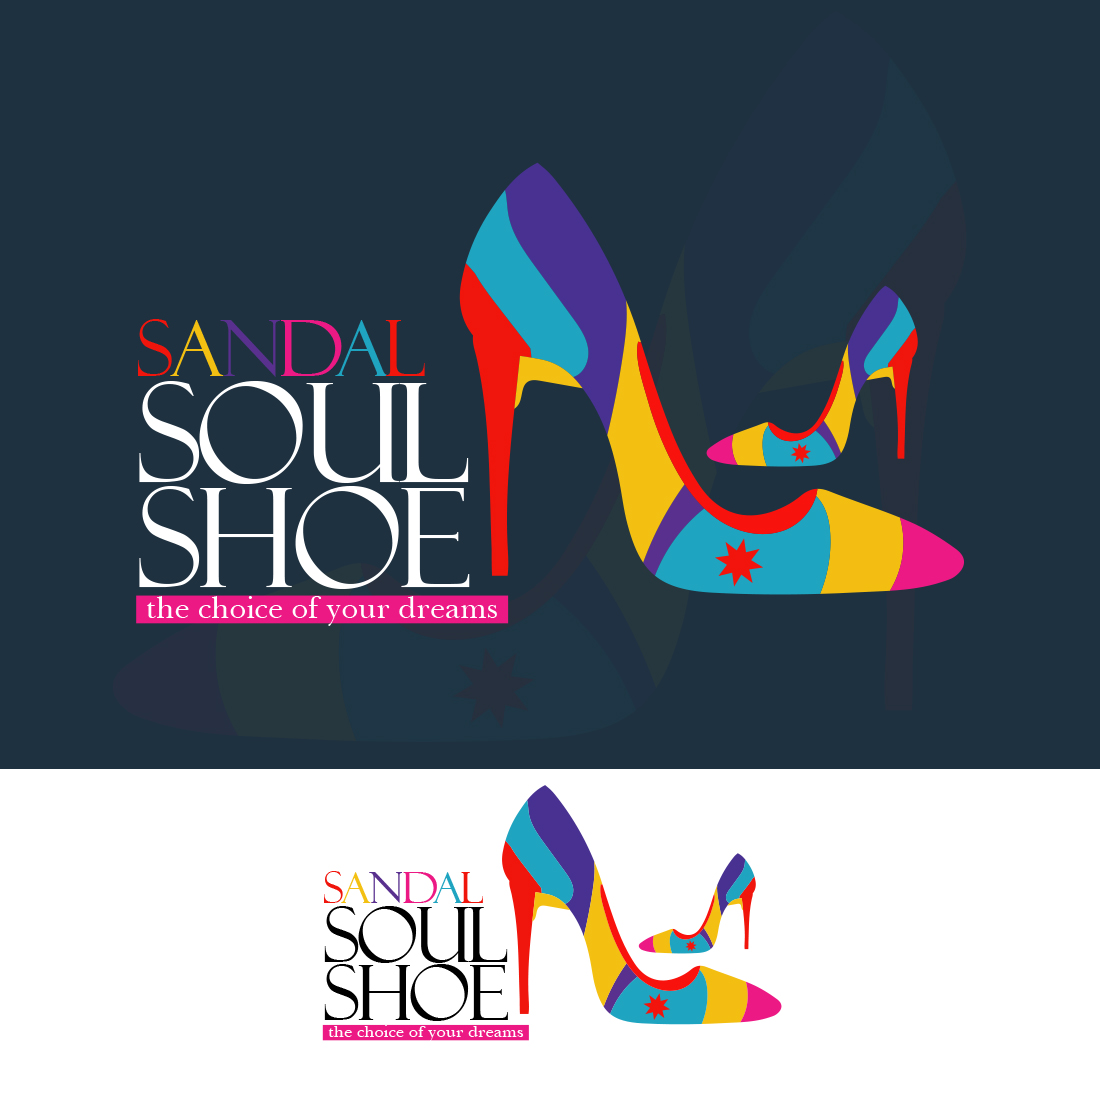 Business logo (Sandal Soul Shoe) with all formats - Only$10 cover image.